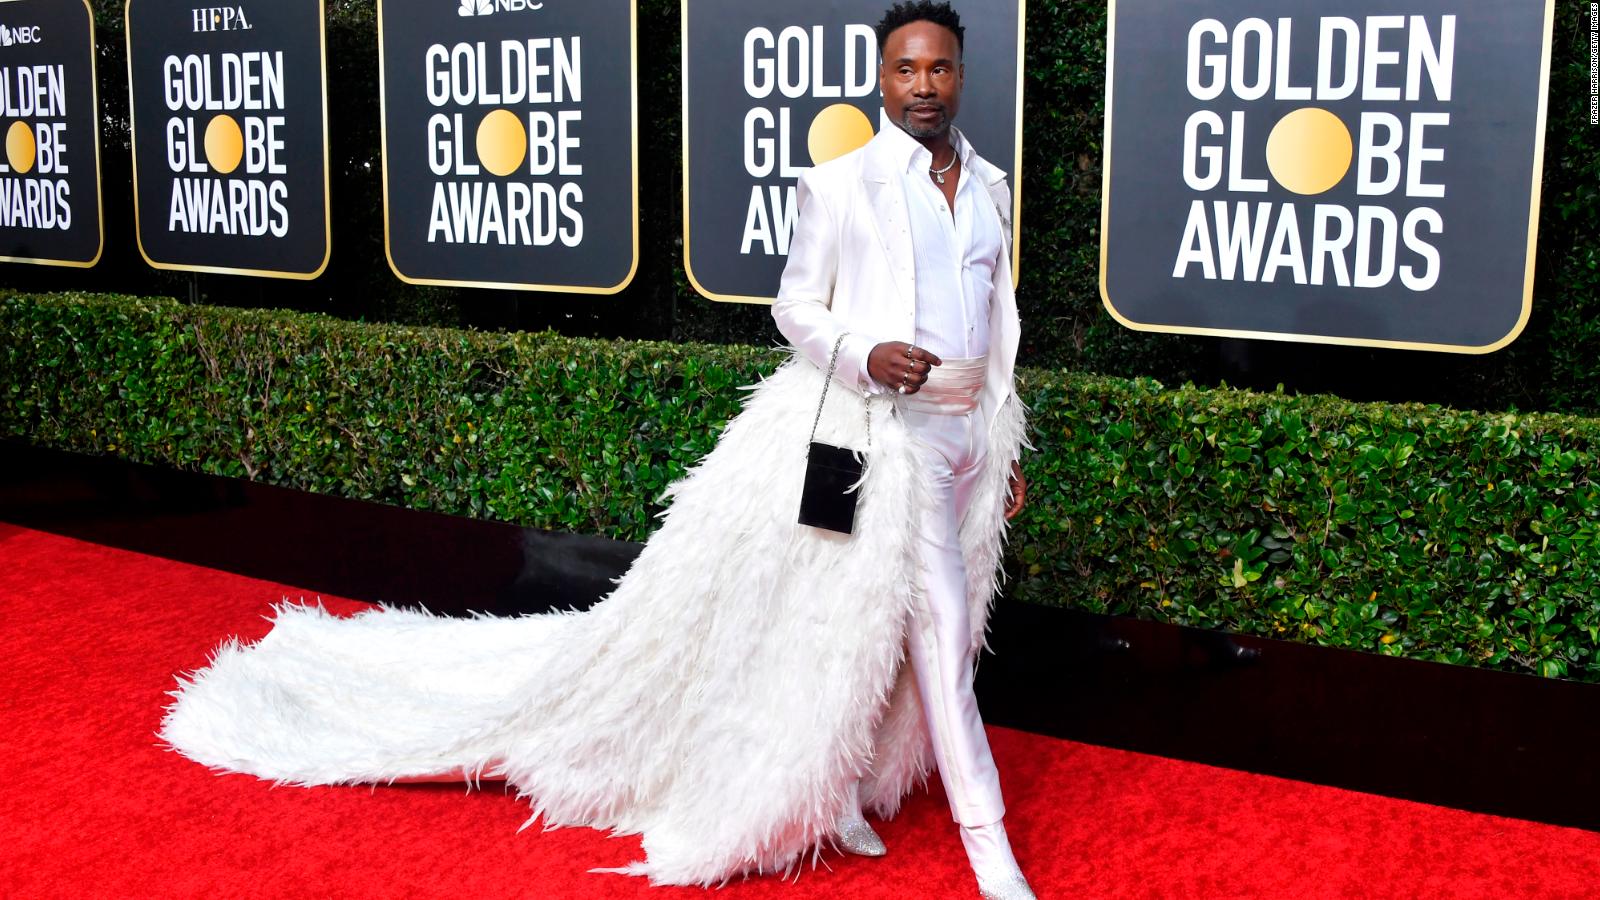 Golden Globes Best Fashion On The Red Carpet Cnn Style